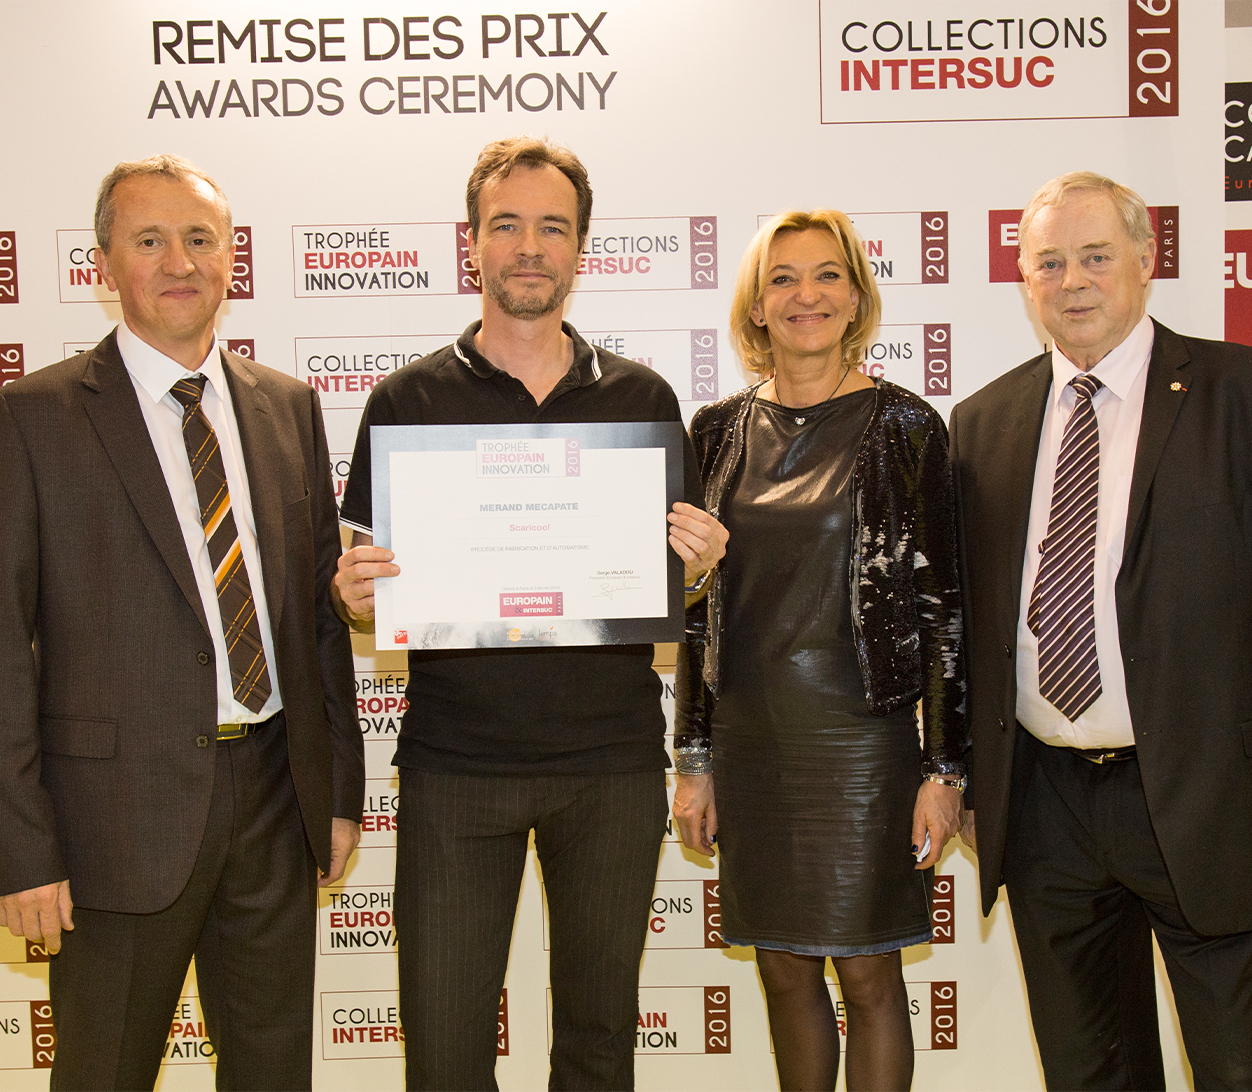 The Europain exhibition innovation trophy awarded to Yannick GERARD